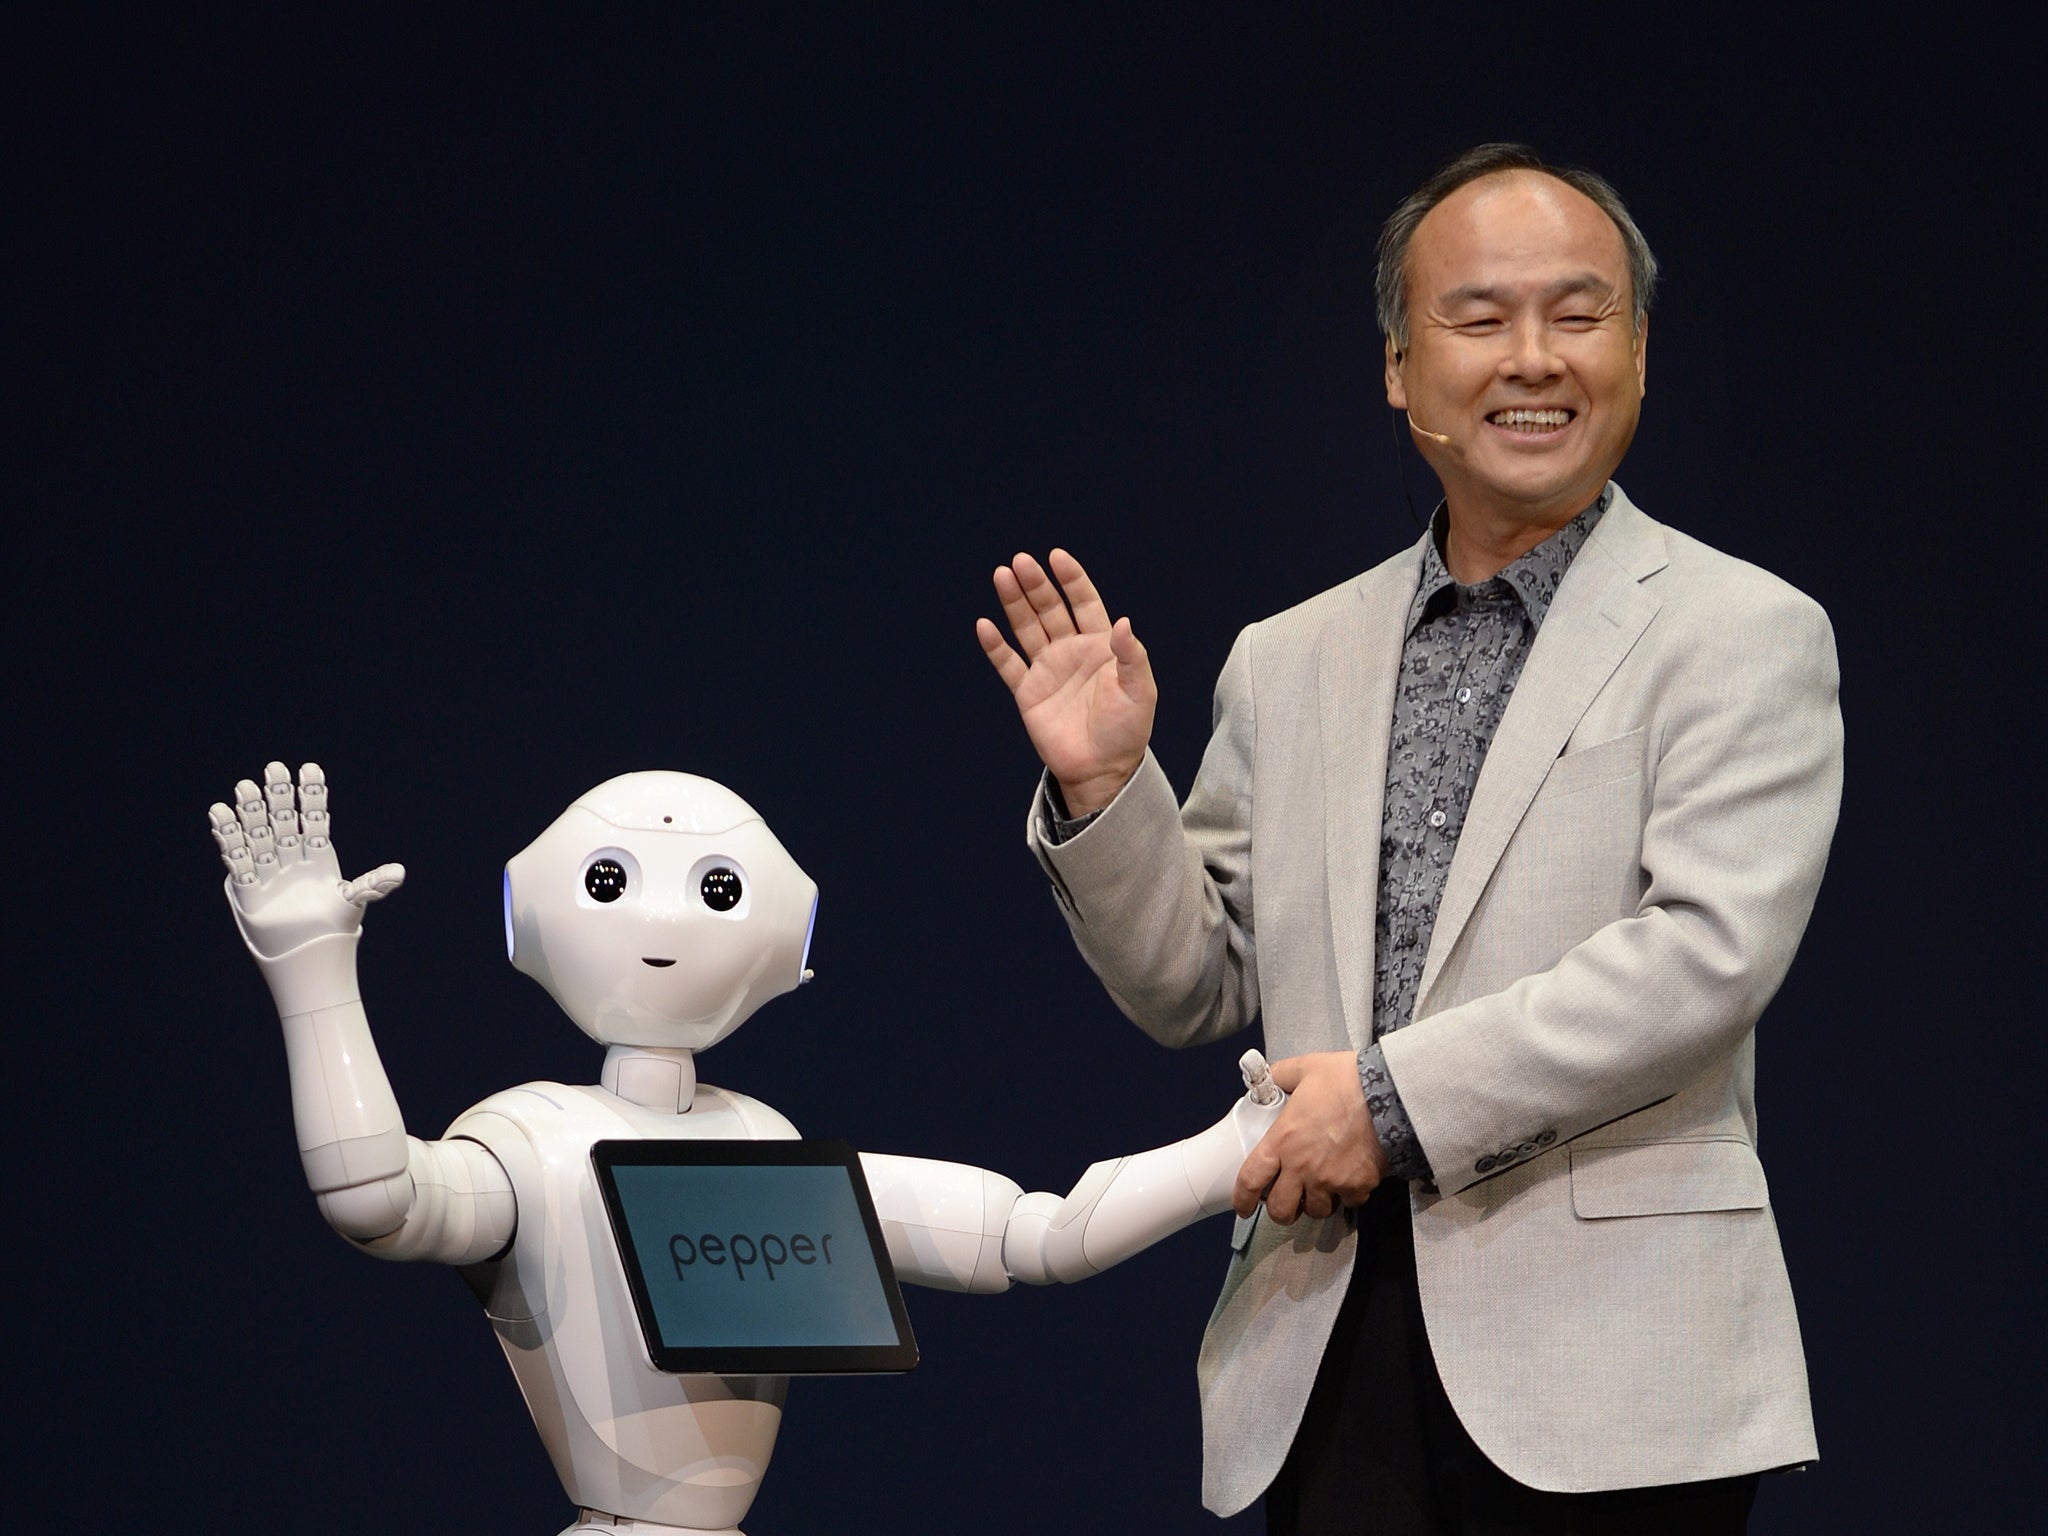 Masayoshi Son, president of Japan's mobile carrier SoftBank, introduces the humanoid robot 'Pepper' equipped with an emotion engine during a press conference in Urayasu, suburban Tokyo, on June 5, 2014